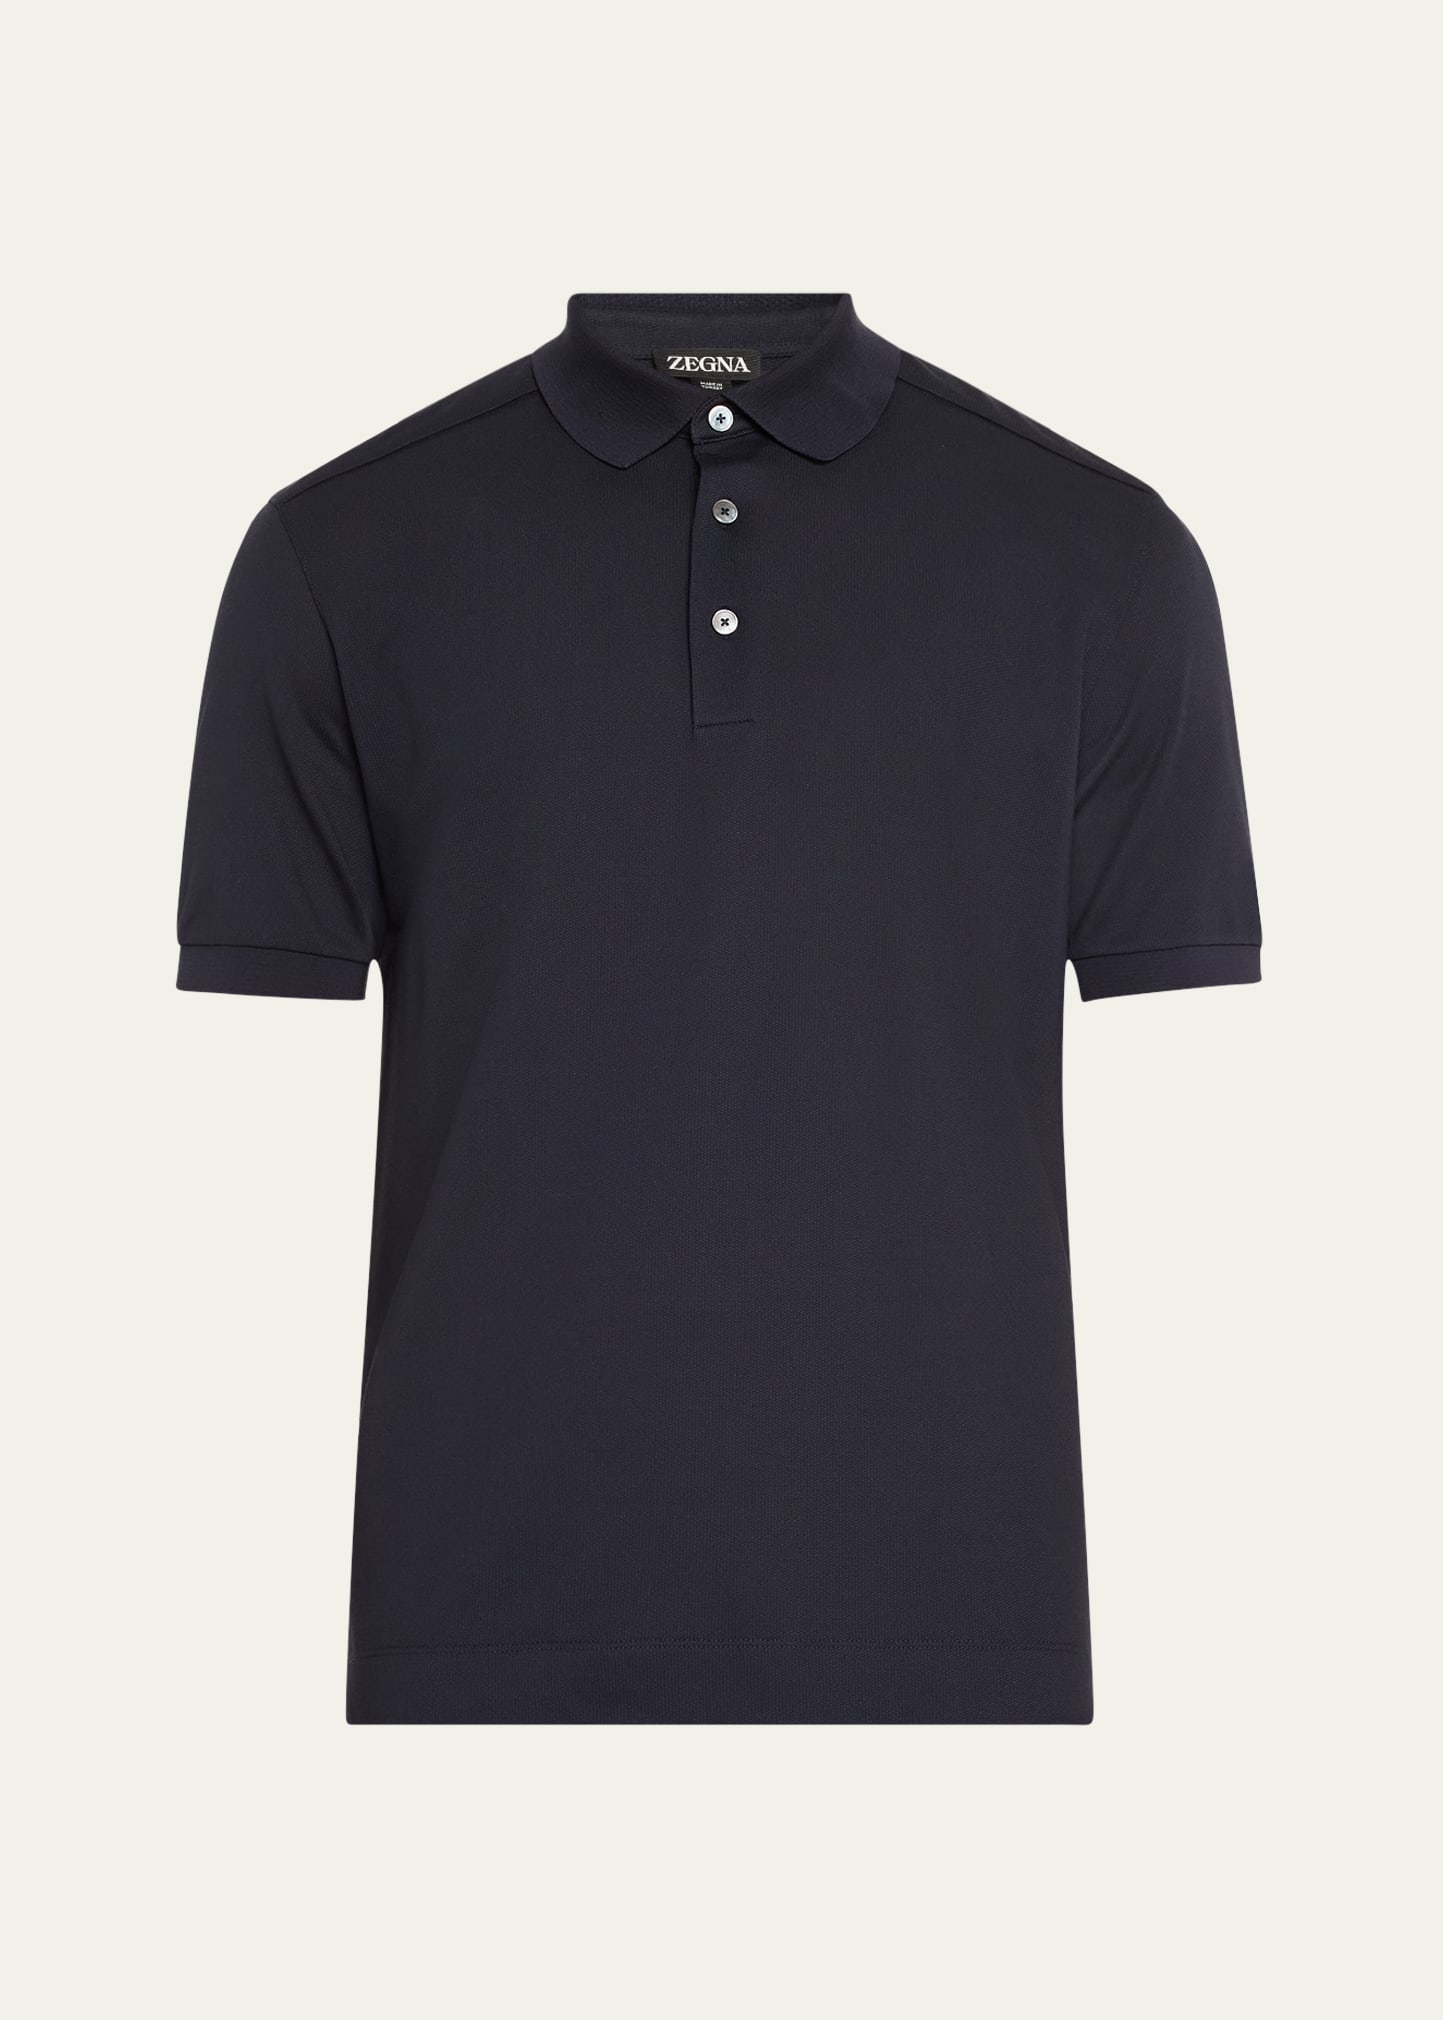 Zegna Men's Cotton And Silk Polo Shirt In Navy Solid